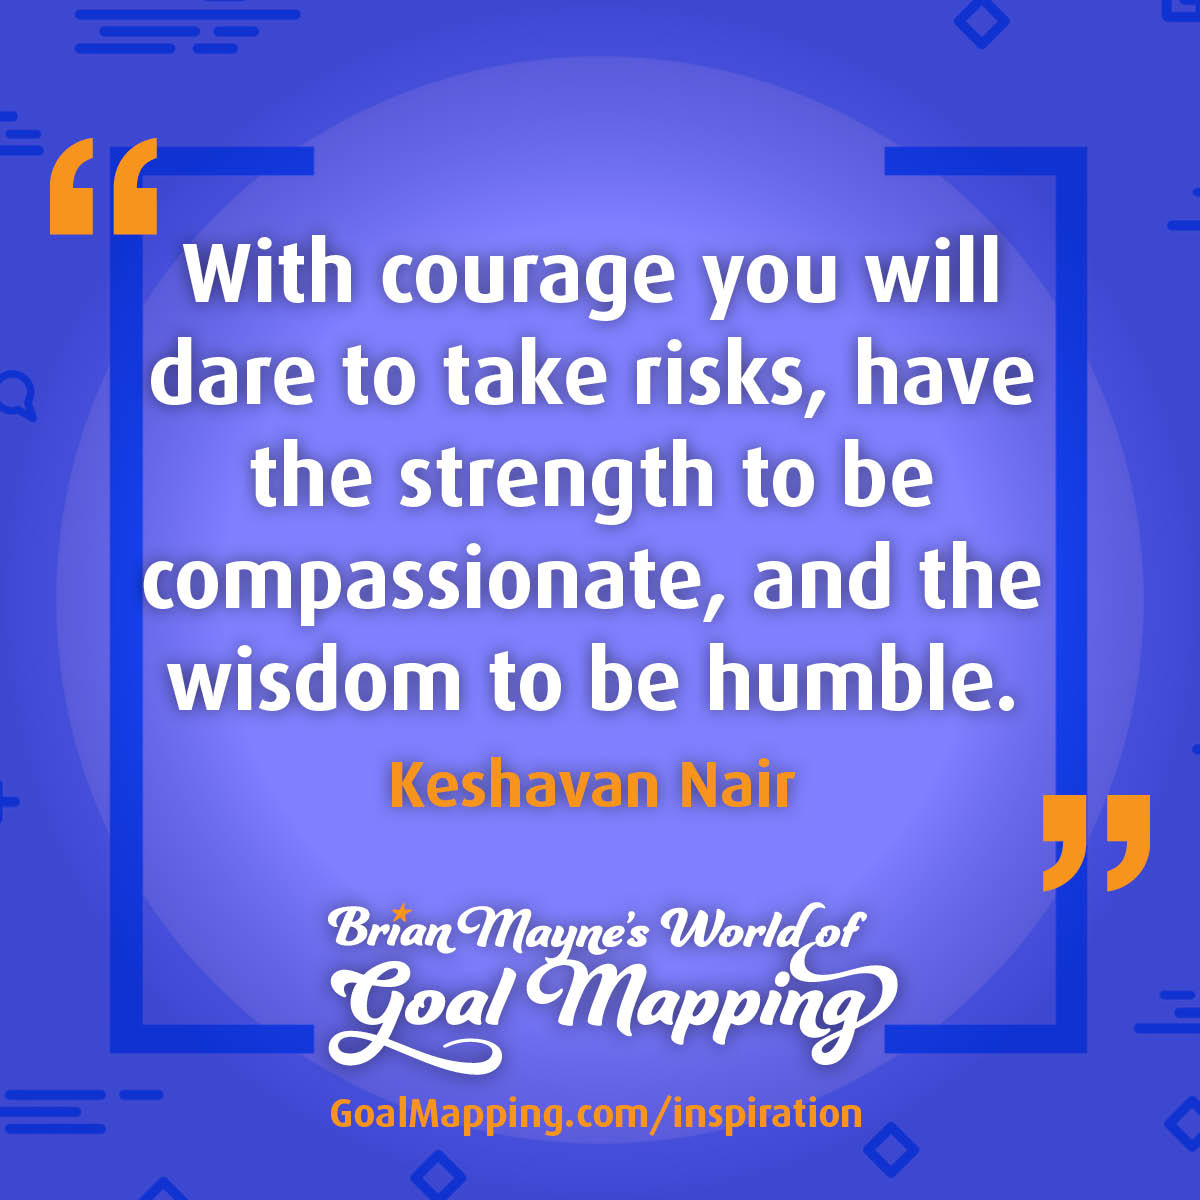 "With courage you will dare to take risks, have the strength to be compassionate, and the wisdom to be humble." Keshavan Nair